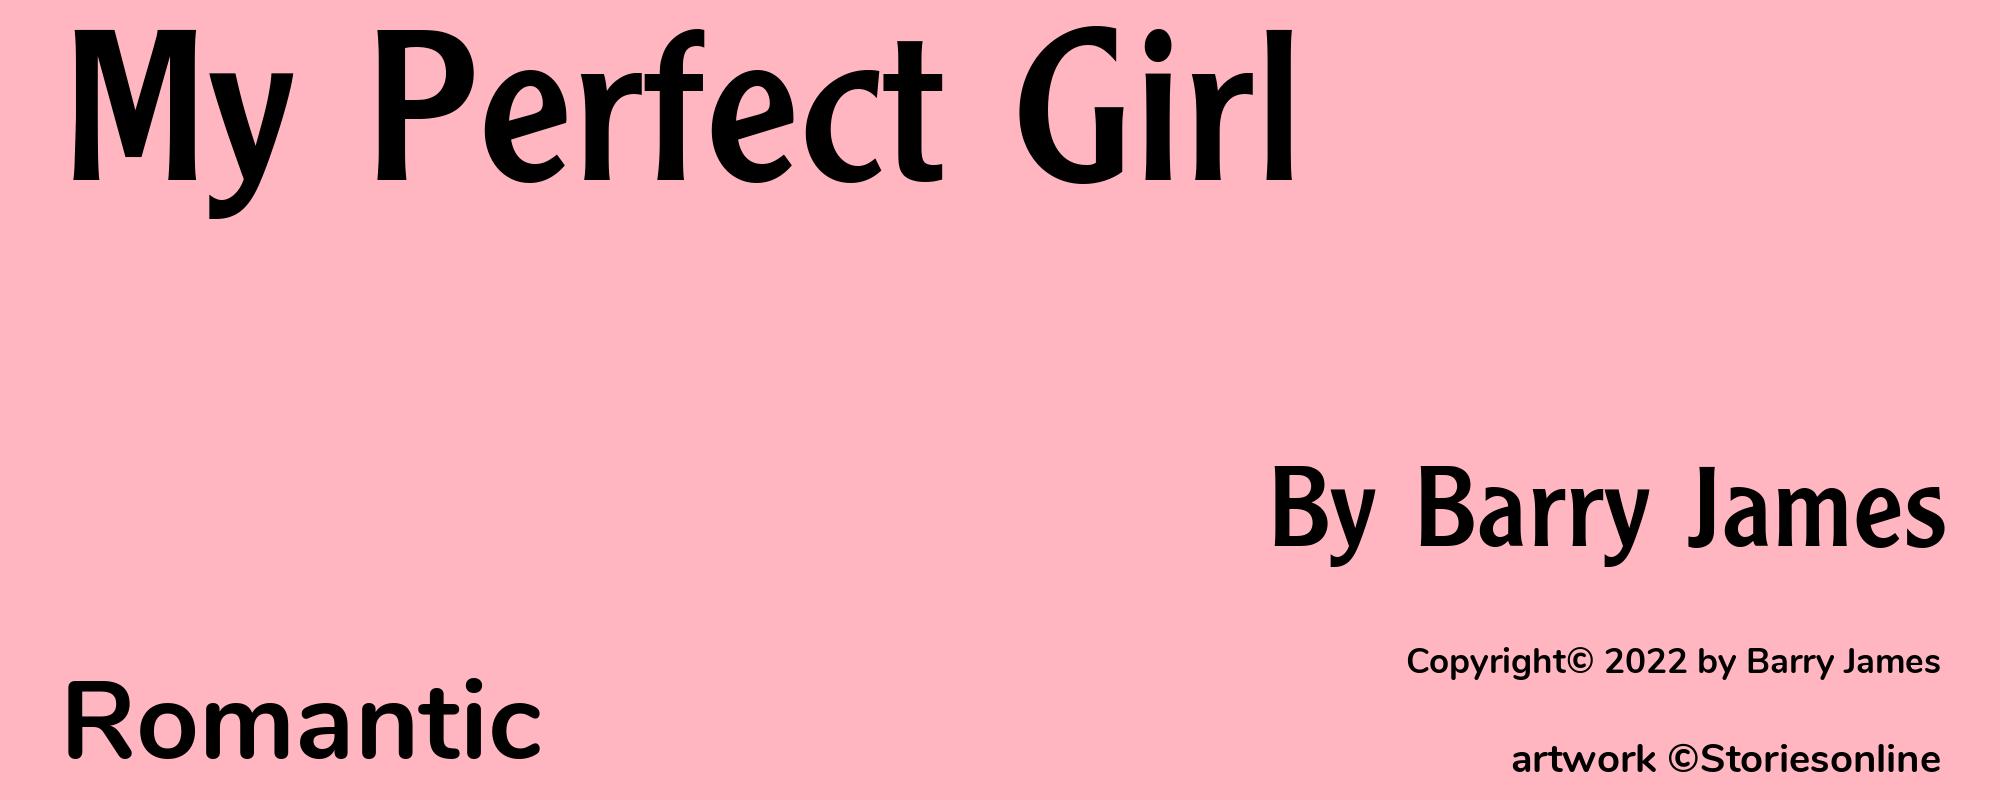 My Perfect Girl - Cover